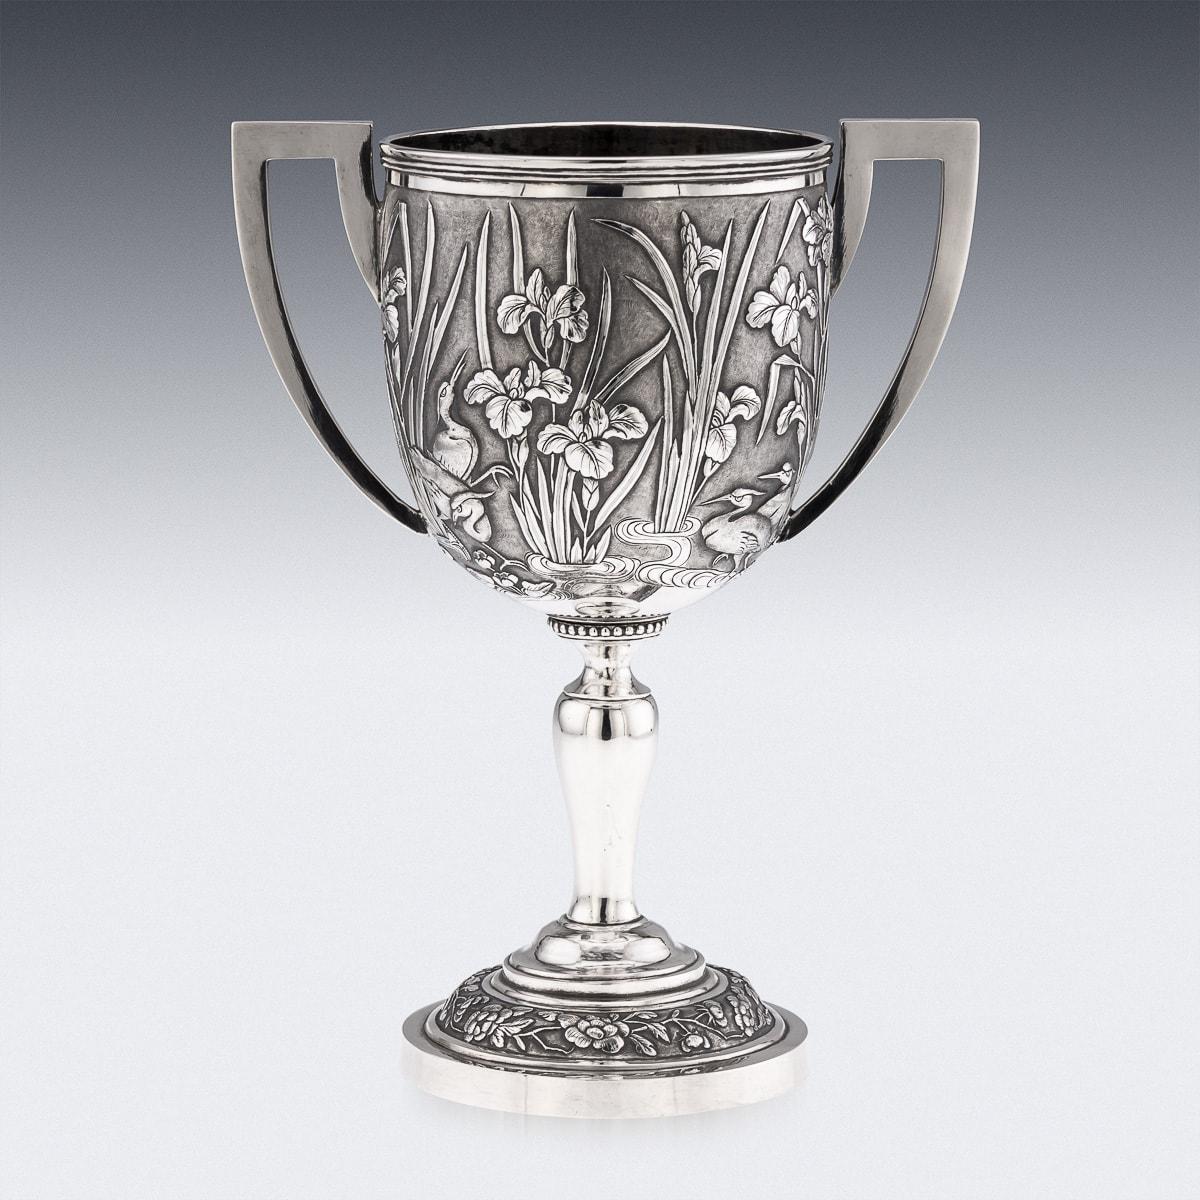 Early 20th Century 20th Century Chinese Export Solid Silver Trophy Cup, Woshing, Shanghai c.1900 For Sale